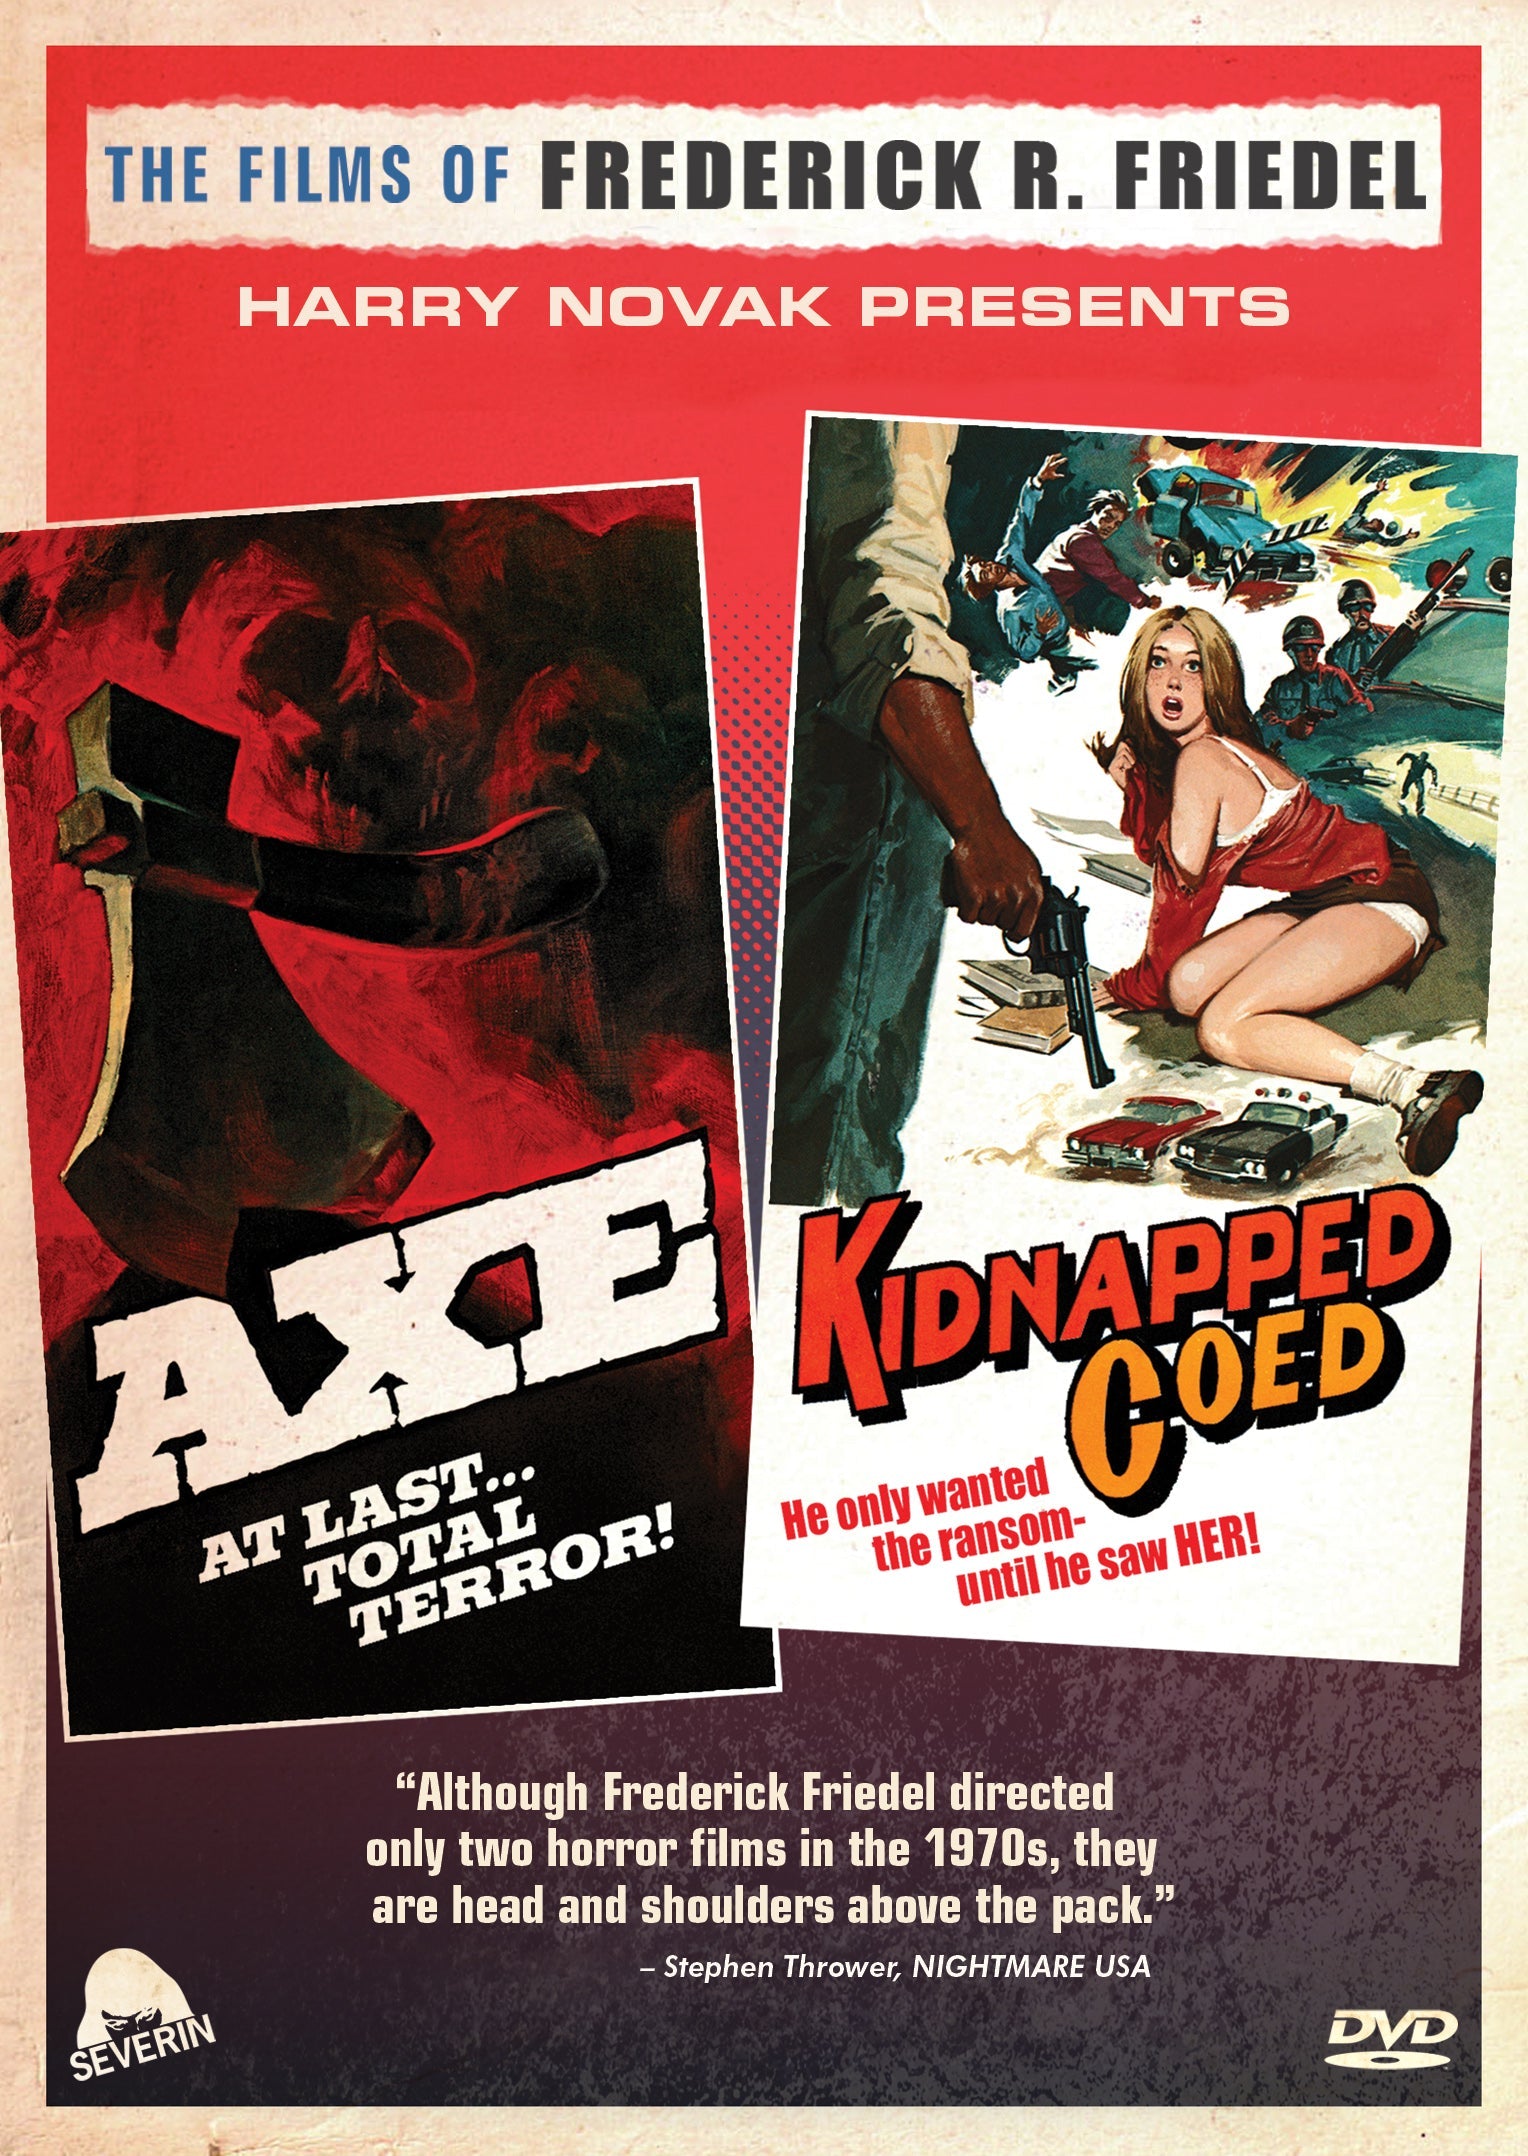 Axe / Kidnapped Coed Dvd